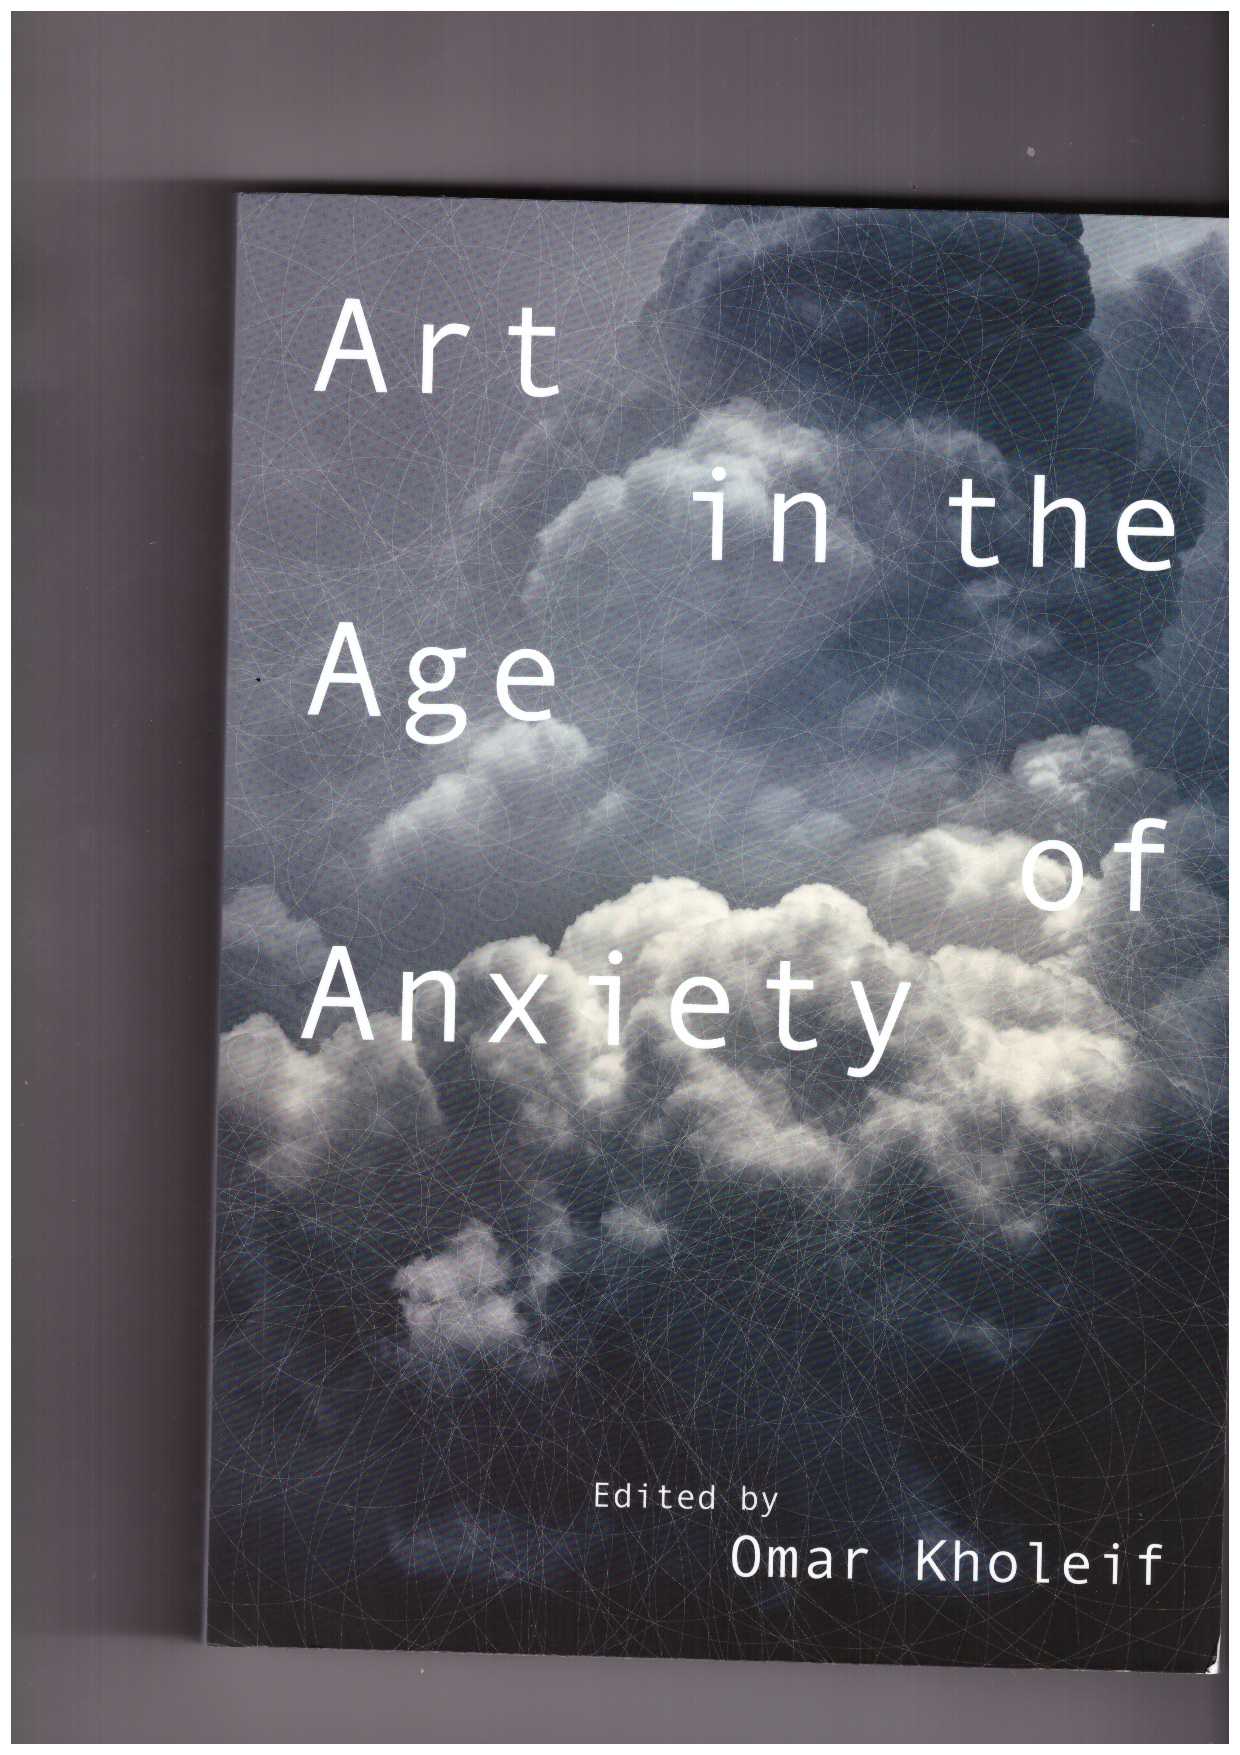 KHOLEIF, Omar (ed) - Art in the Age of Anxiety